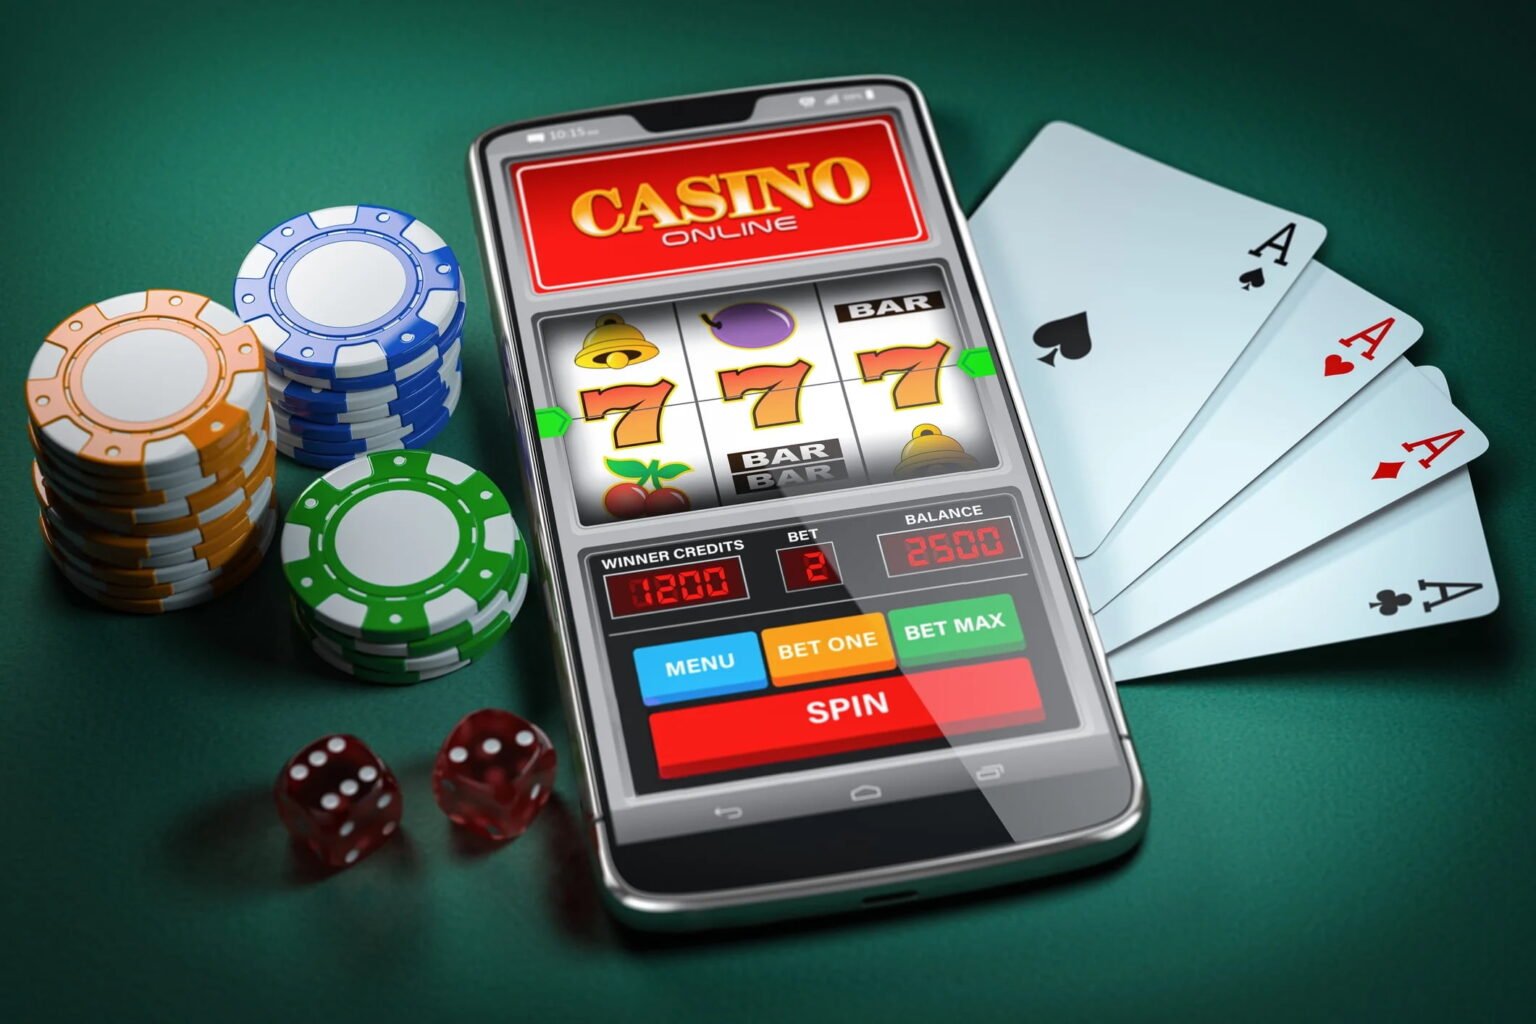 Every day more and more people choose to gamble online. Find out why online gambling is the absolute best way to enjoy your favorite casino games.